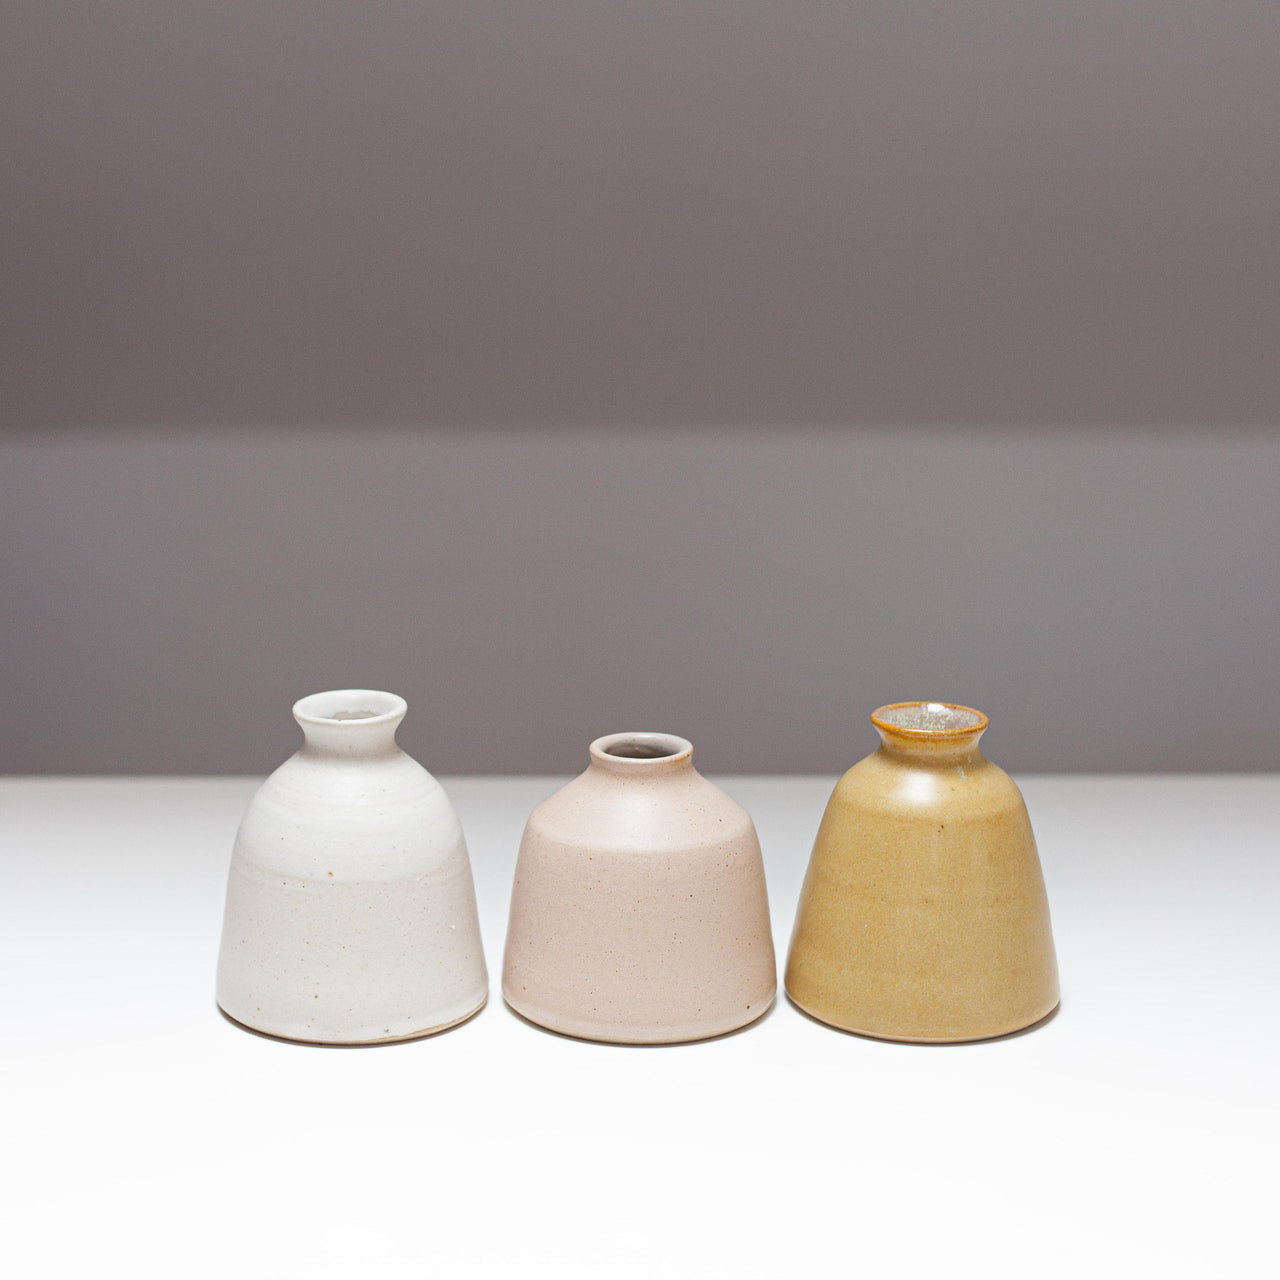 EOT Ceramics bud vase collection in white, pink and yellow